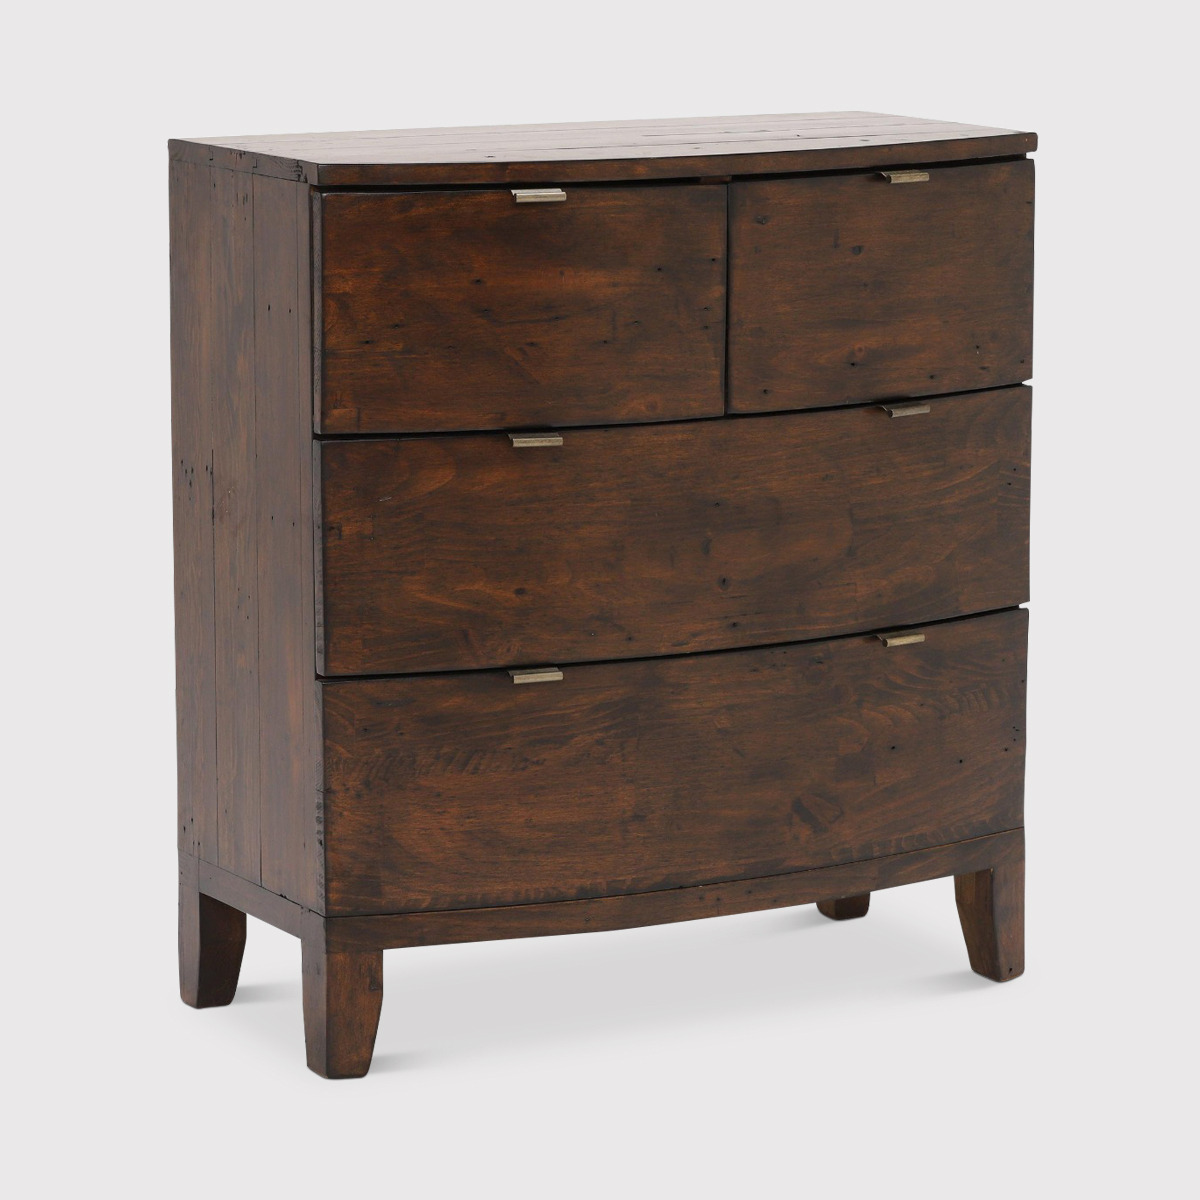 Navajos 4 Drawer Chest, Wood - Barker & Stonehouse - image 1